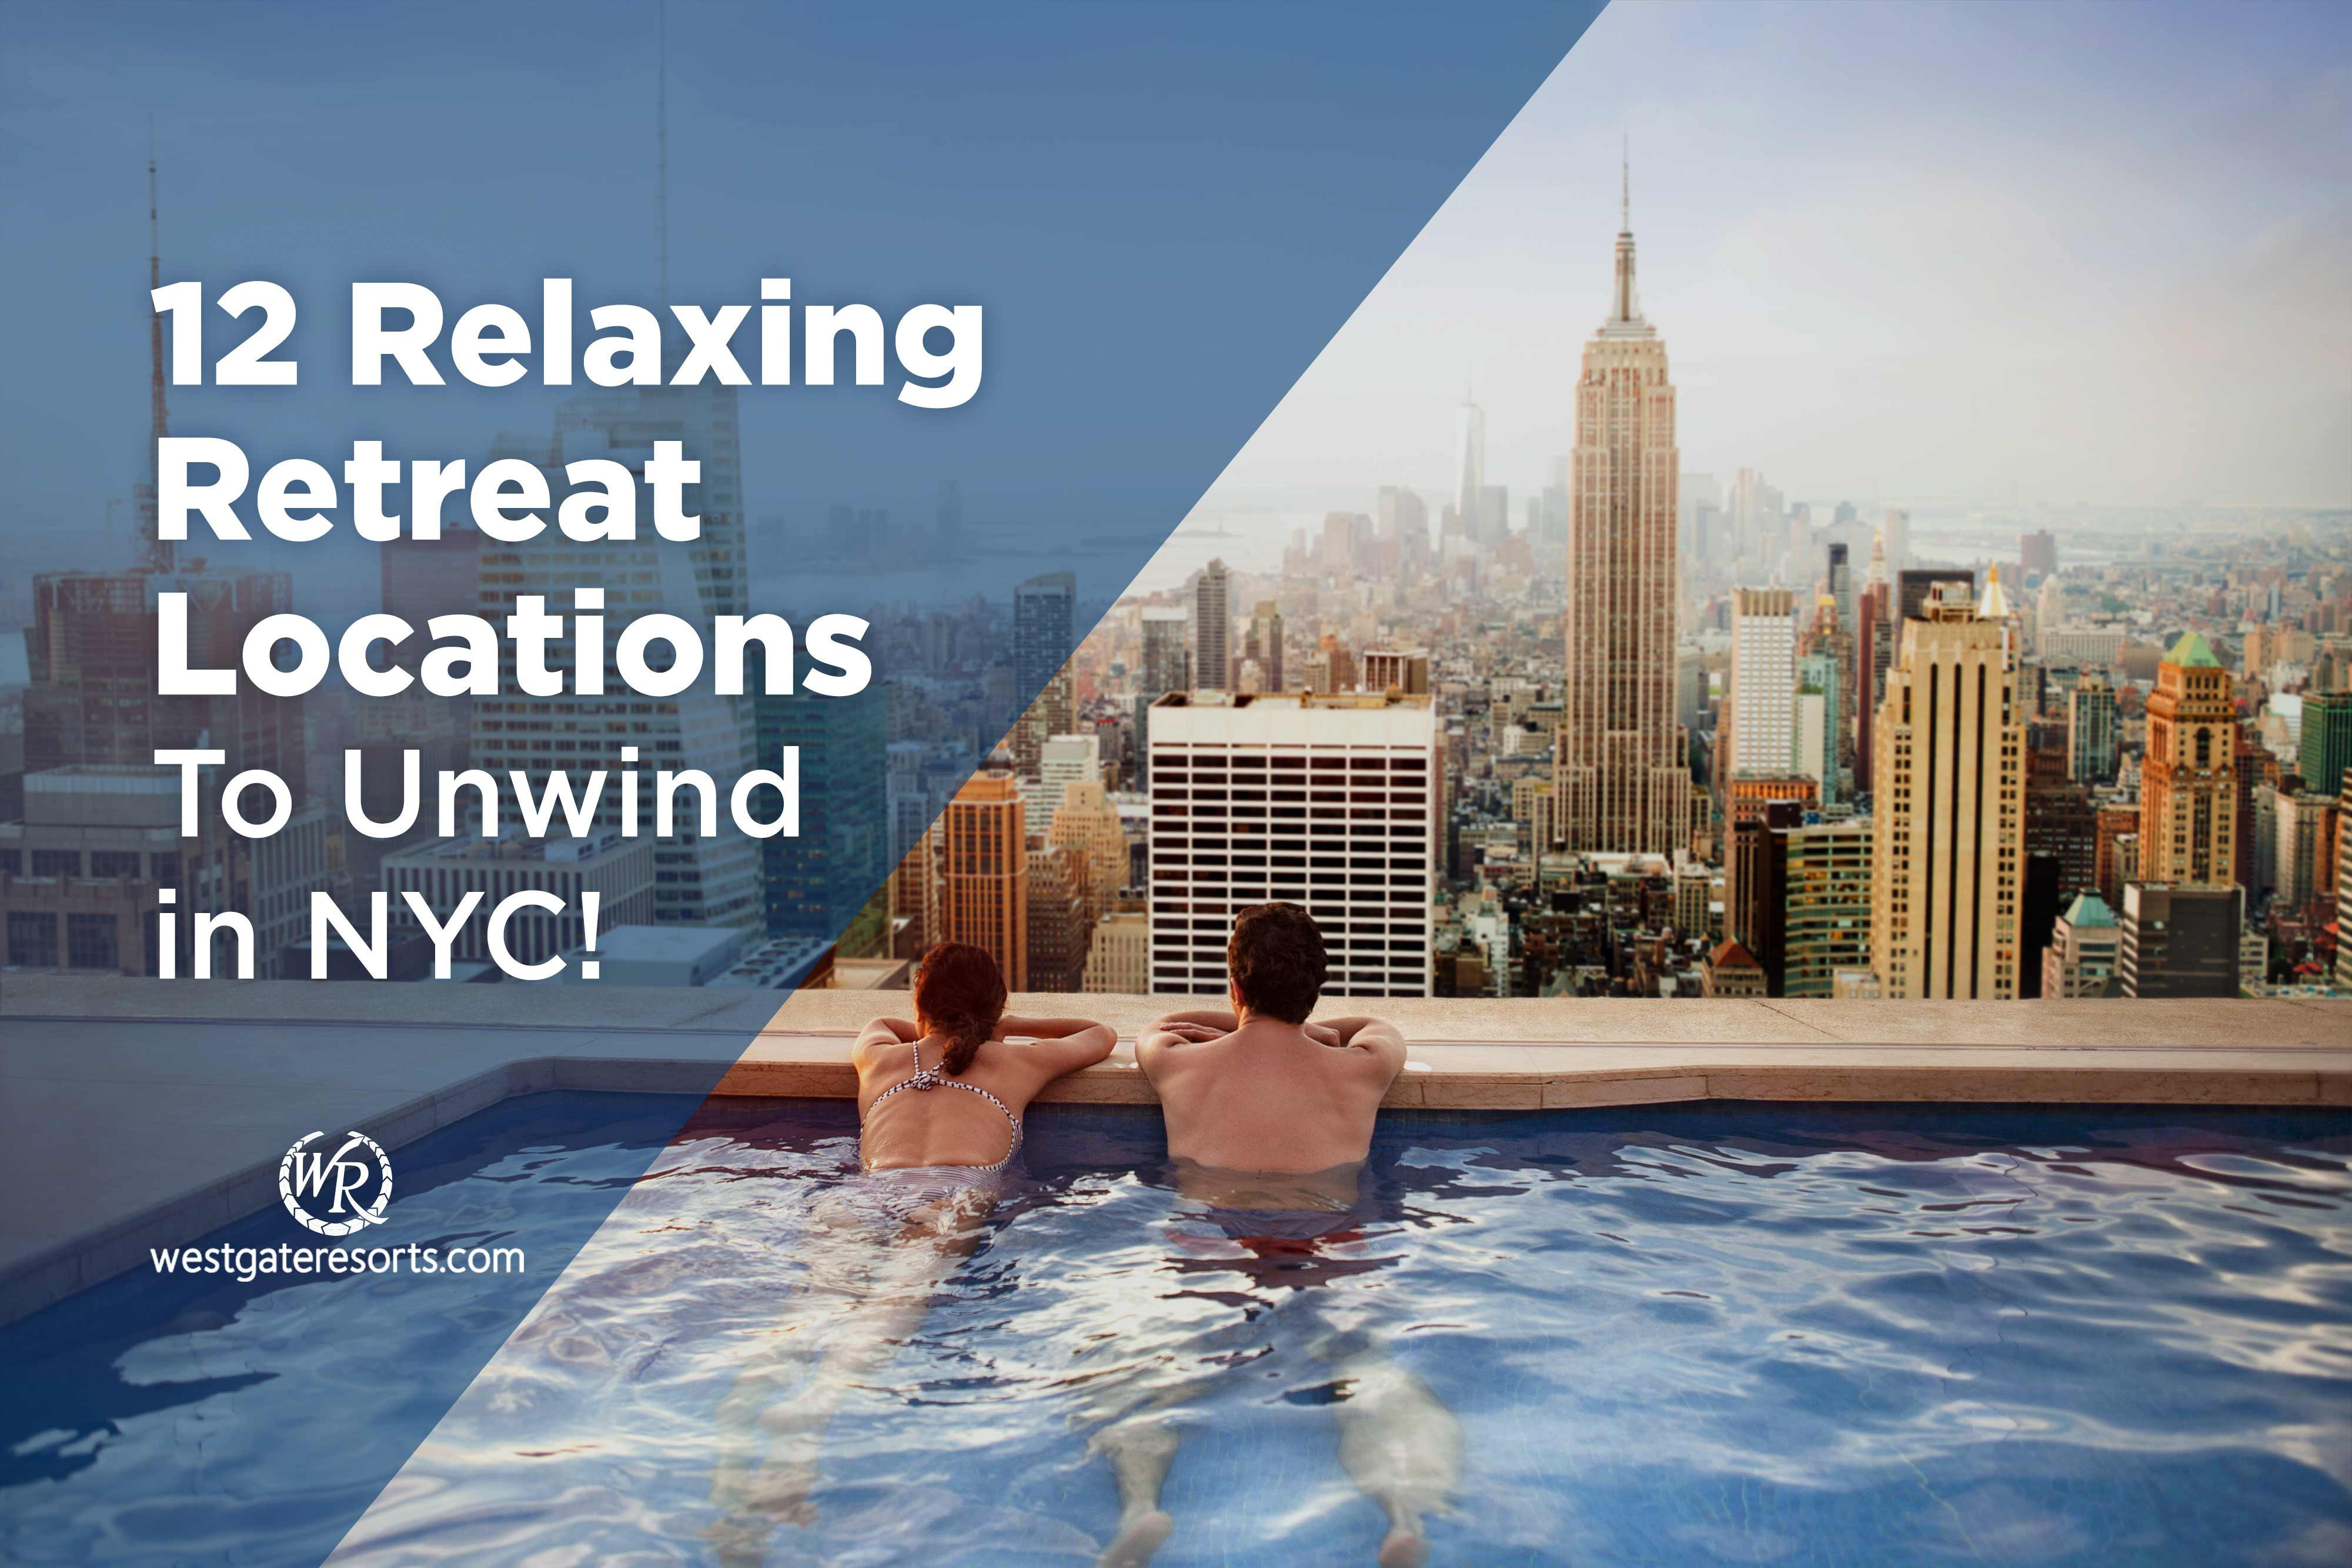 12 Relaxing Retreat Locations To Unwind in NYC! | NYC Retreats And Quiet Spots